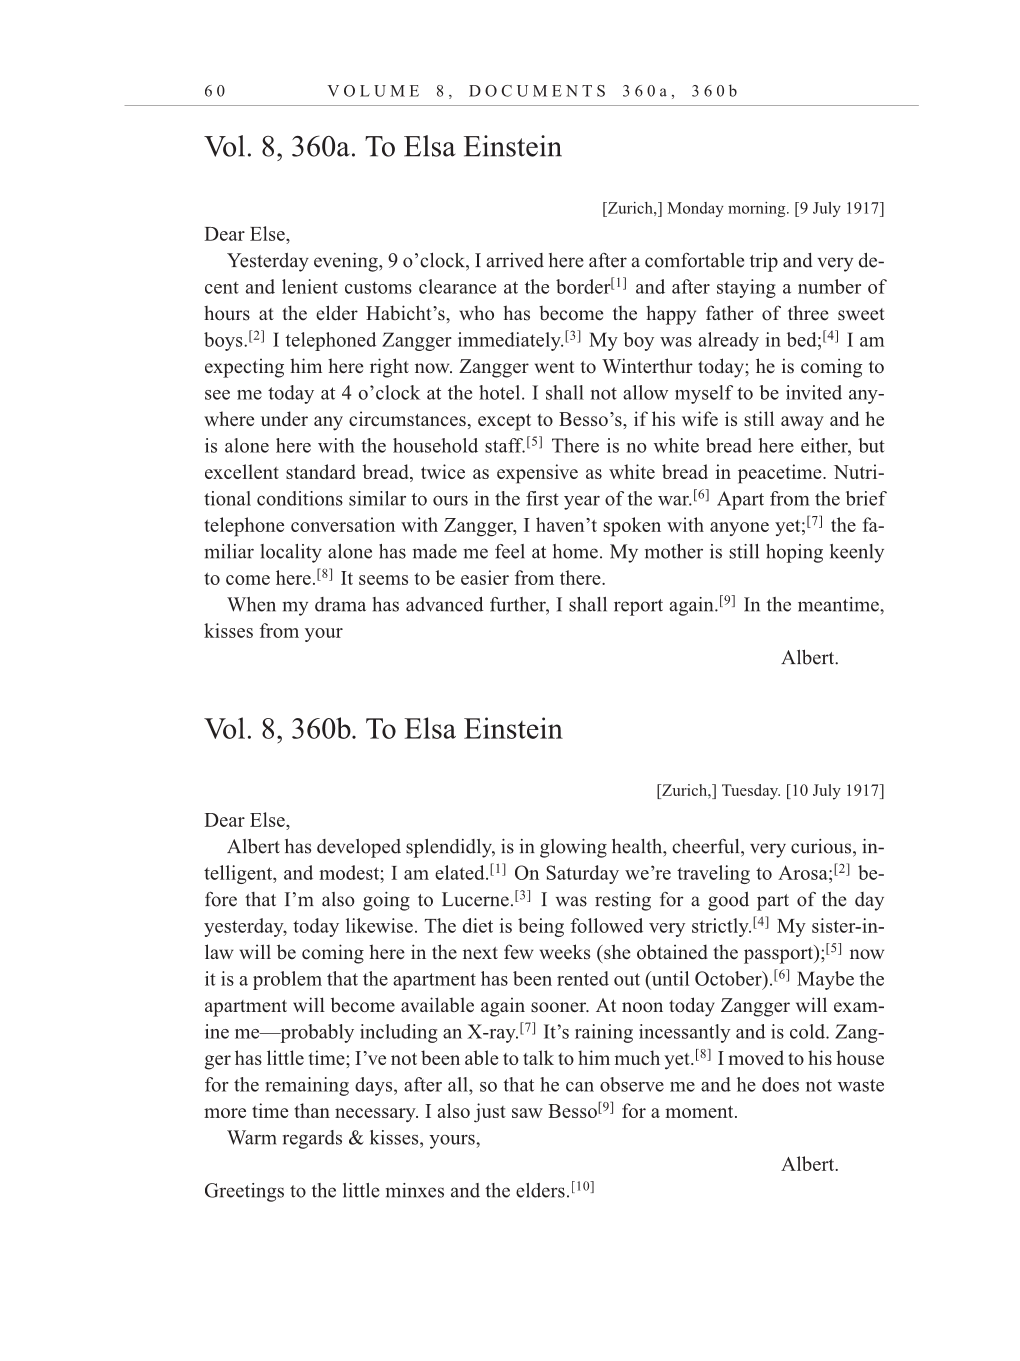 Volume 10: The Berlin Years: Correspondence, May-December 1920, and Supplementary Correspondence, 1909-1920 (English translation supplement) page 60